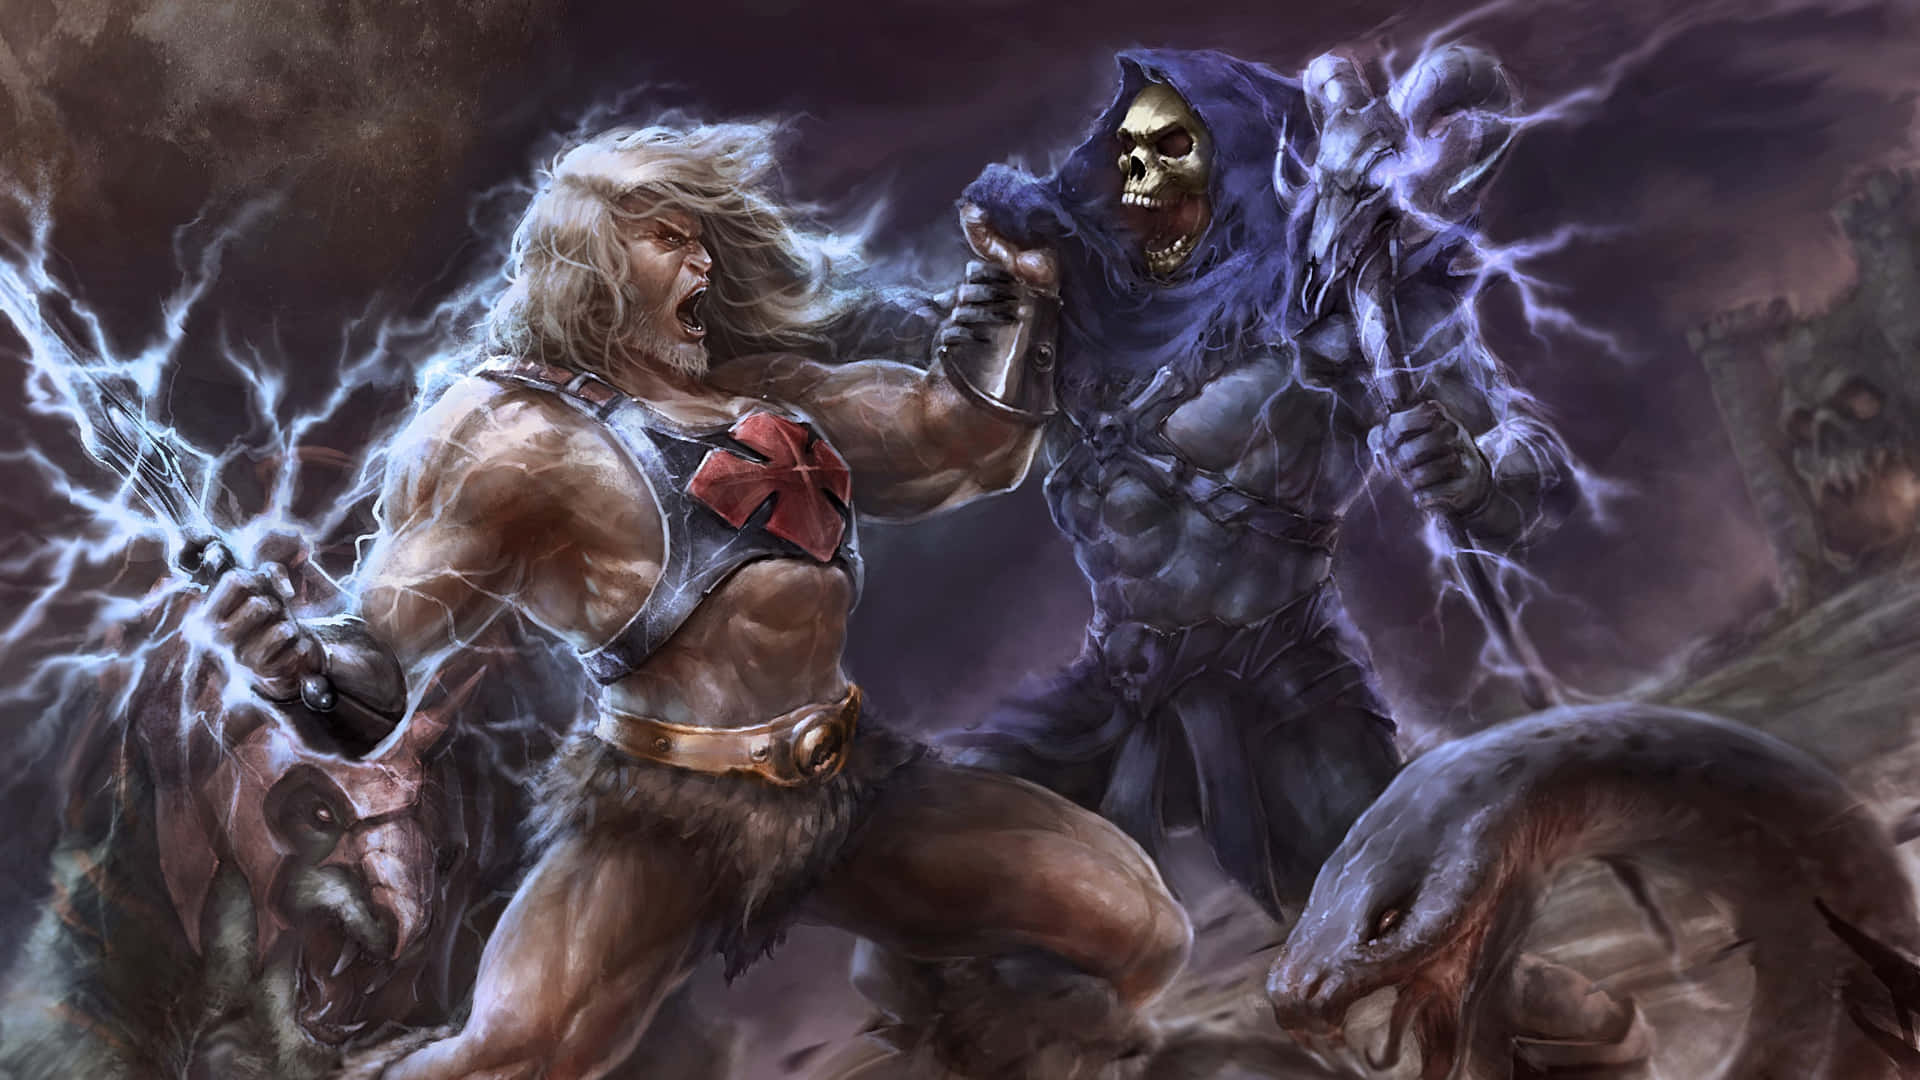 He-man And Skeleton Fighting In The Dark Background